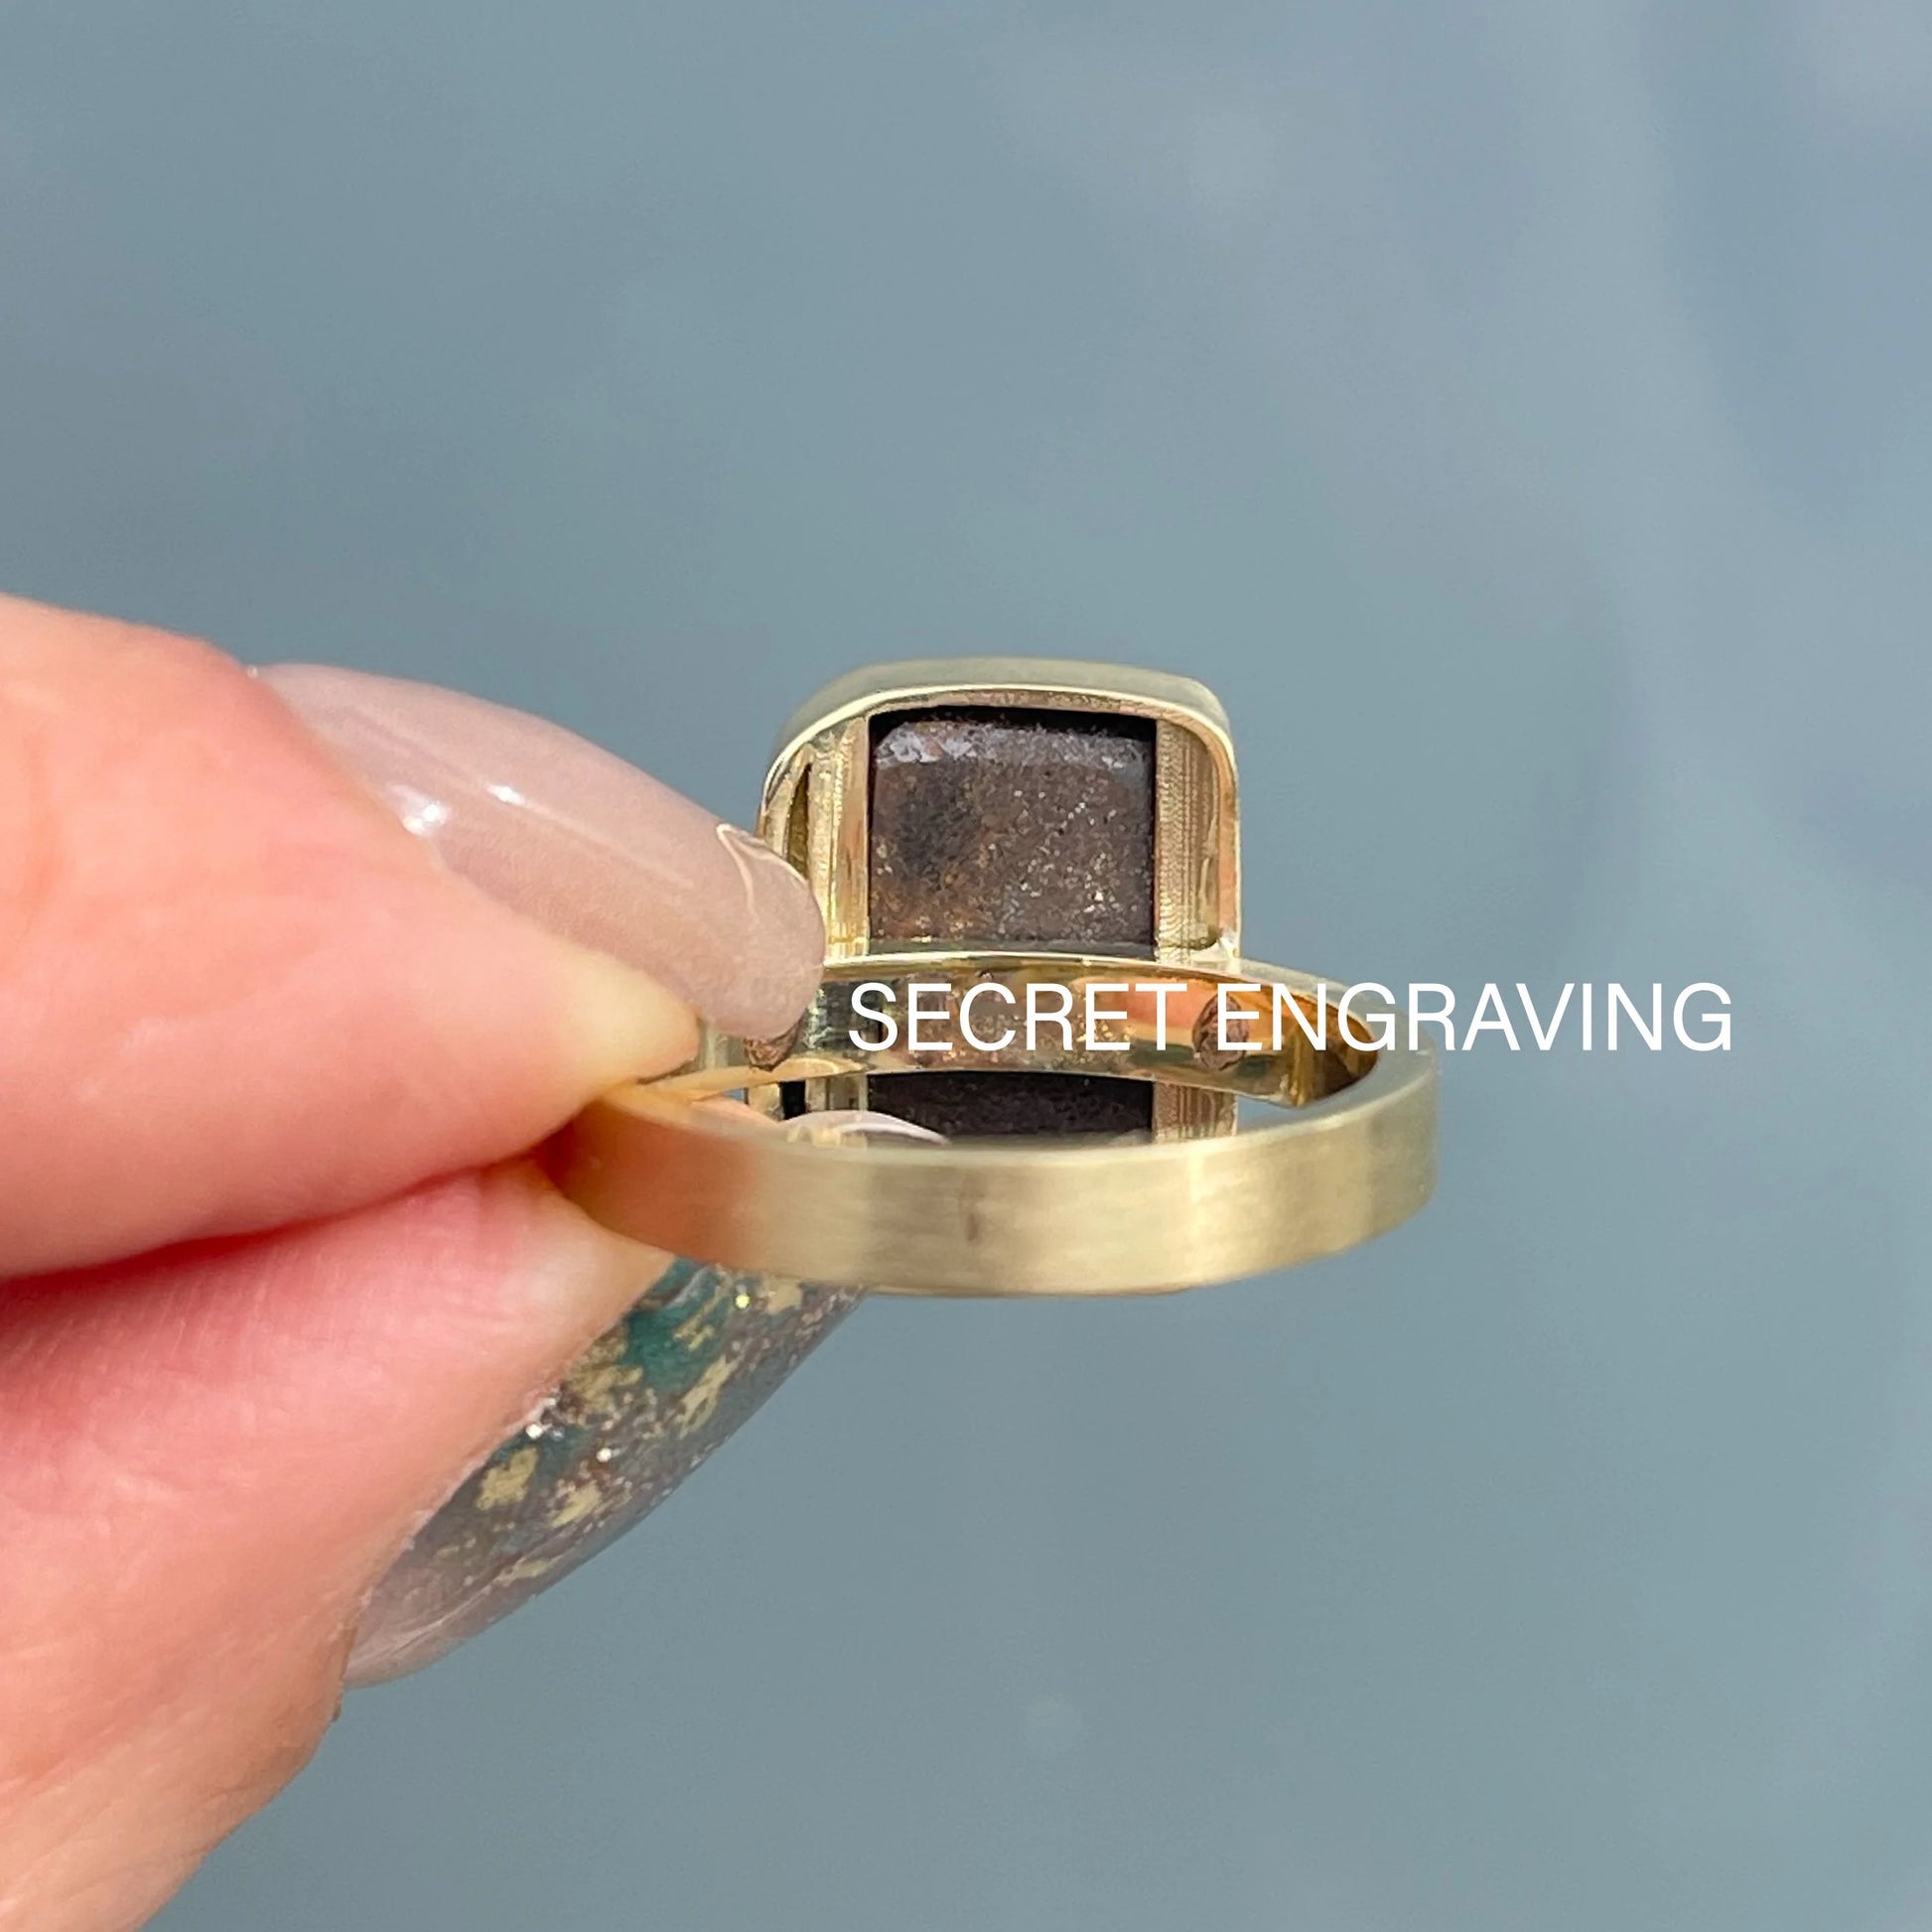 An Australian Opal Ring by NIXIN Jewelry with a Boulder Opal set in 14k gold, shown from behind to indicate the spot of the secret engraving.